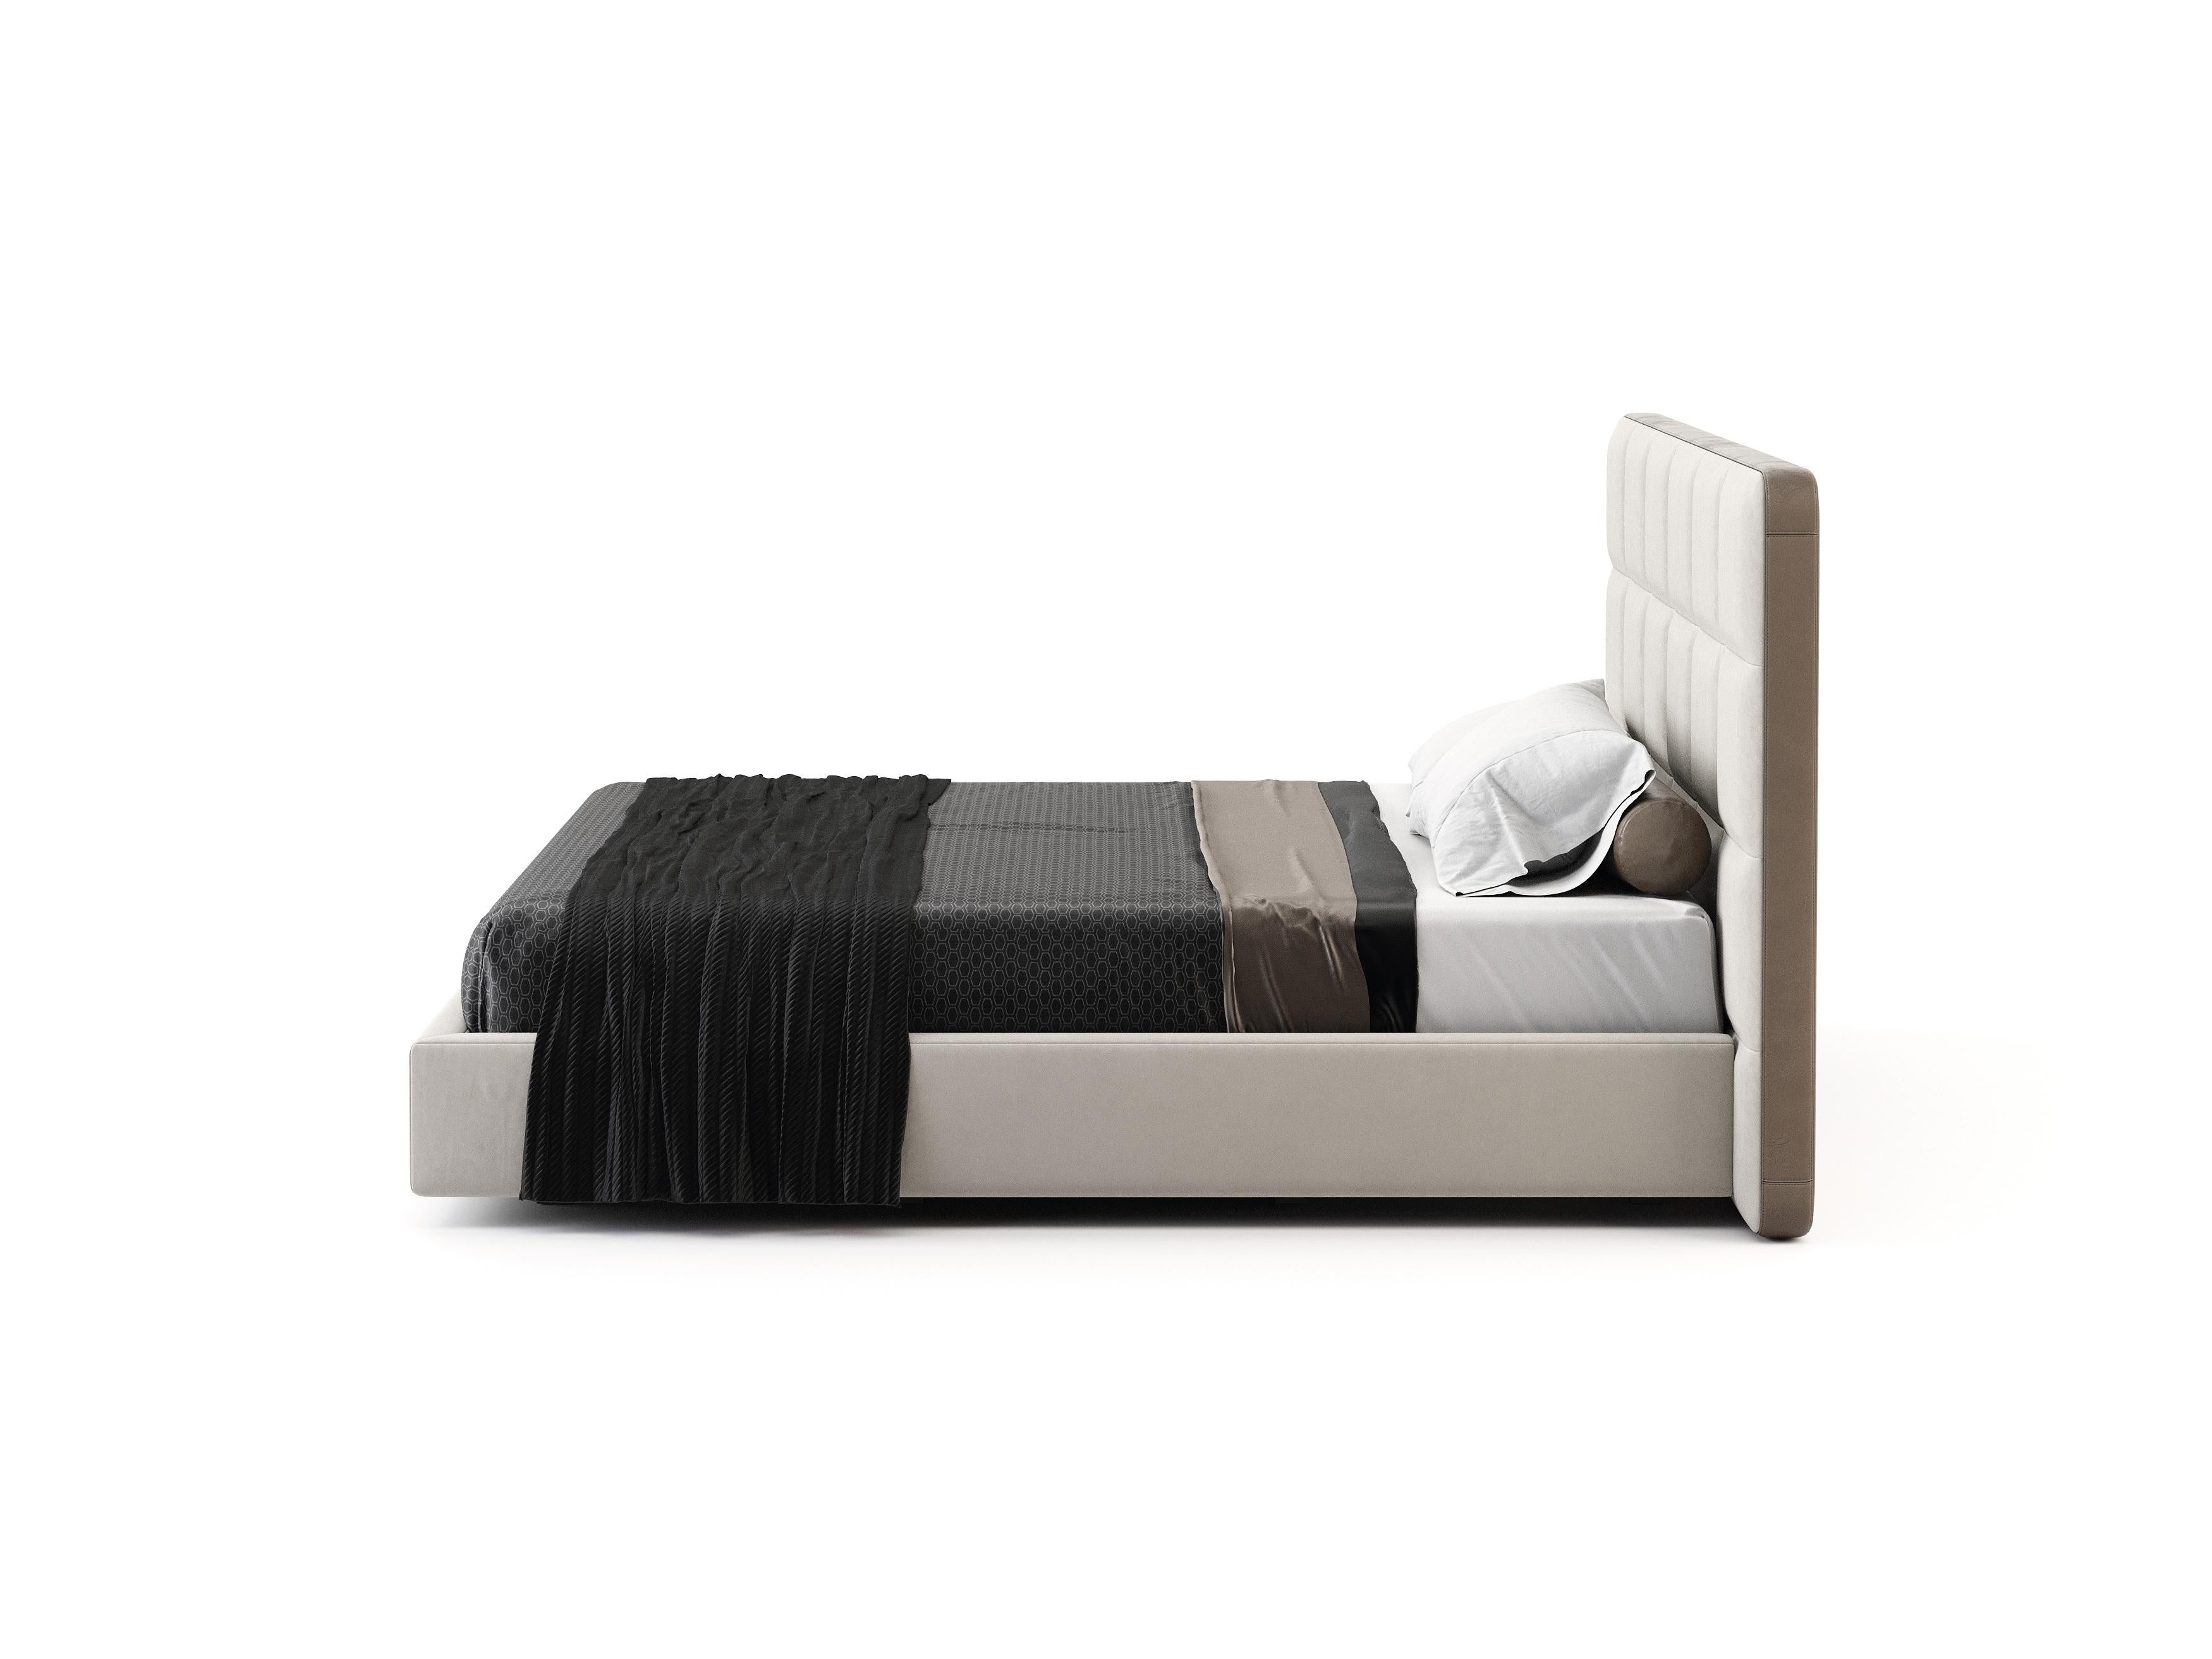 Portuguese Queen Modern Madrid Bed made with velvet and leather, Handmade by Stylish Club For Sale